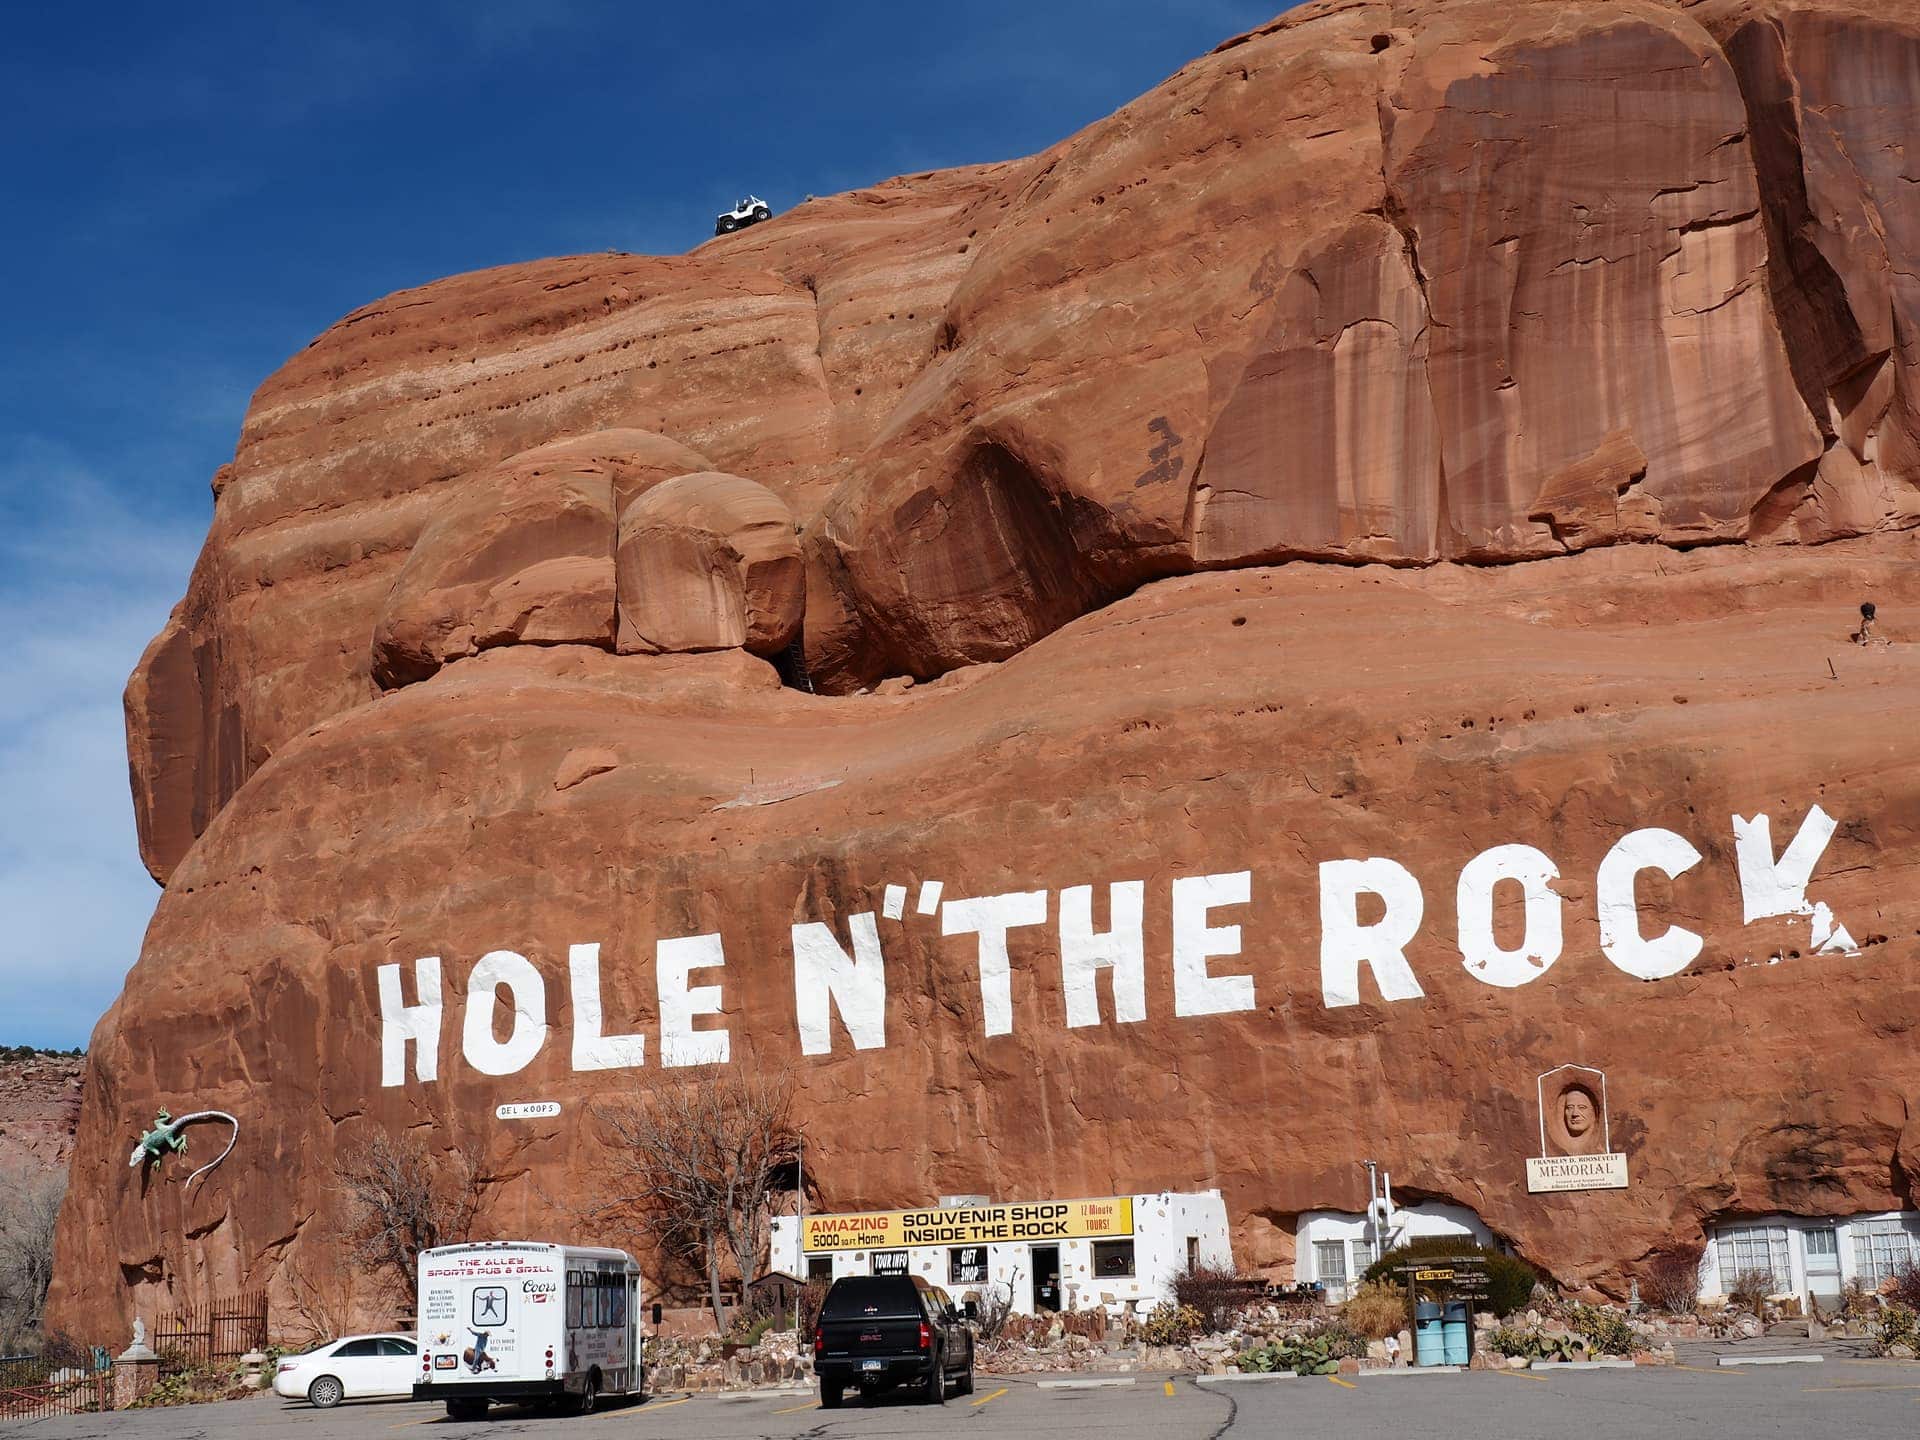 The "Hole n' The Rock" house in Moab, UT